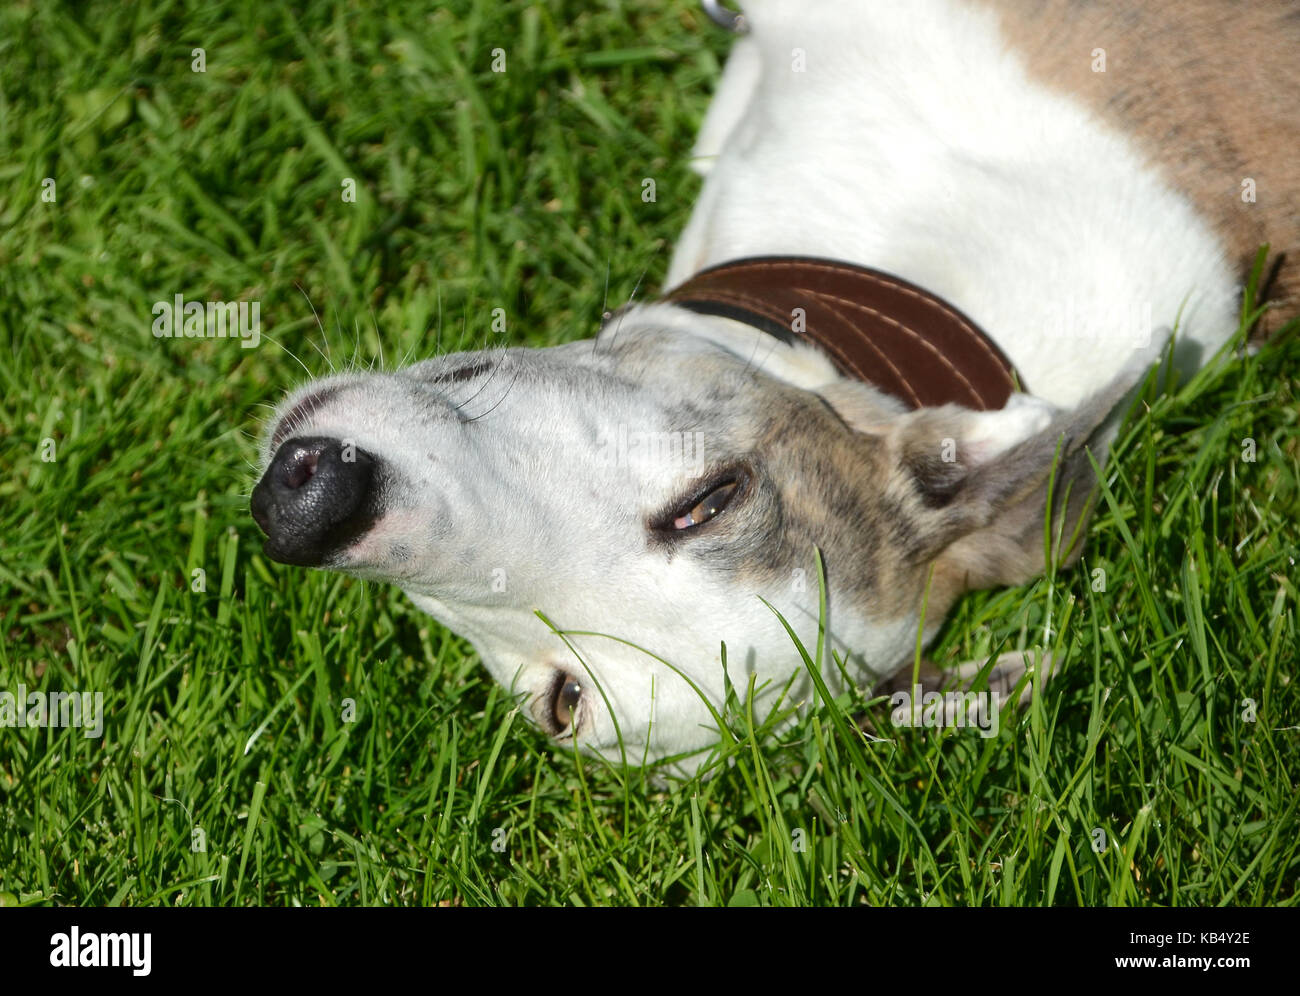 Galgo espanol dog lays relaxed on grass, this is a closeup on the dog's head. Stock Photo